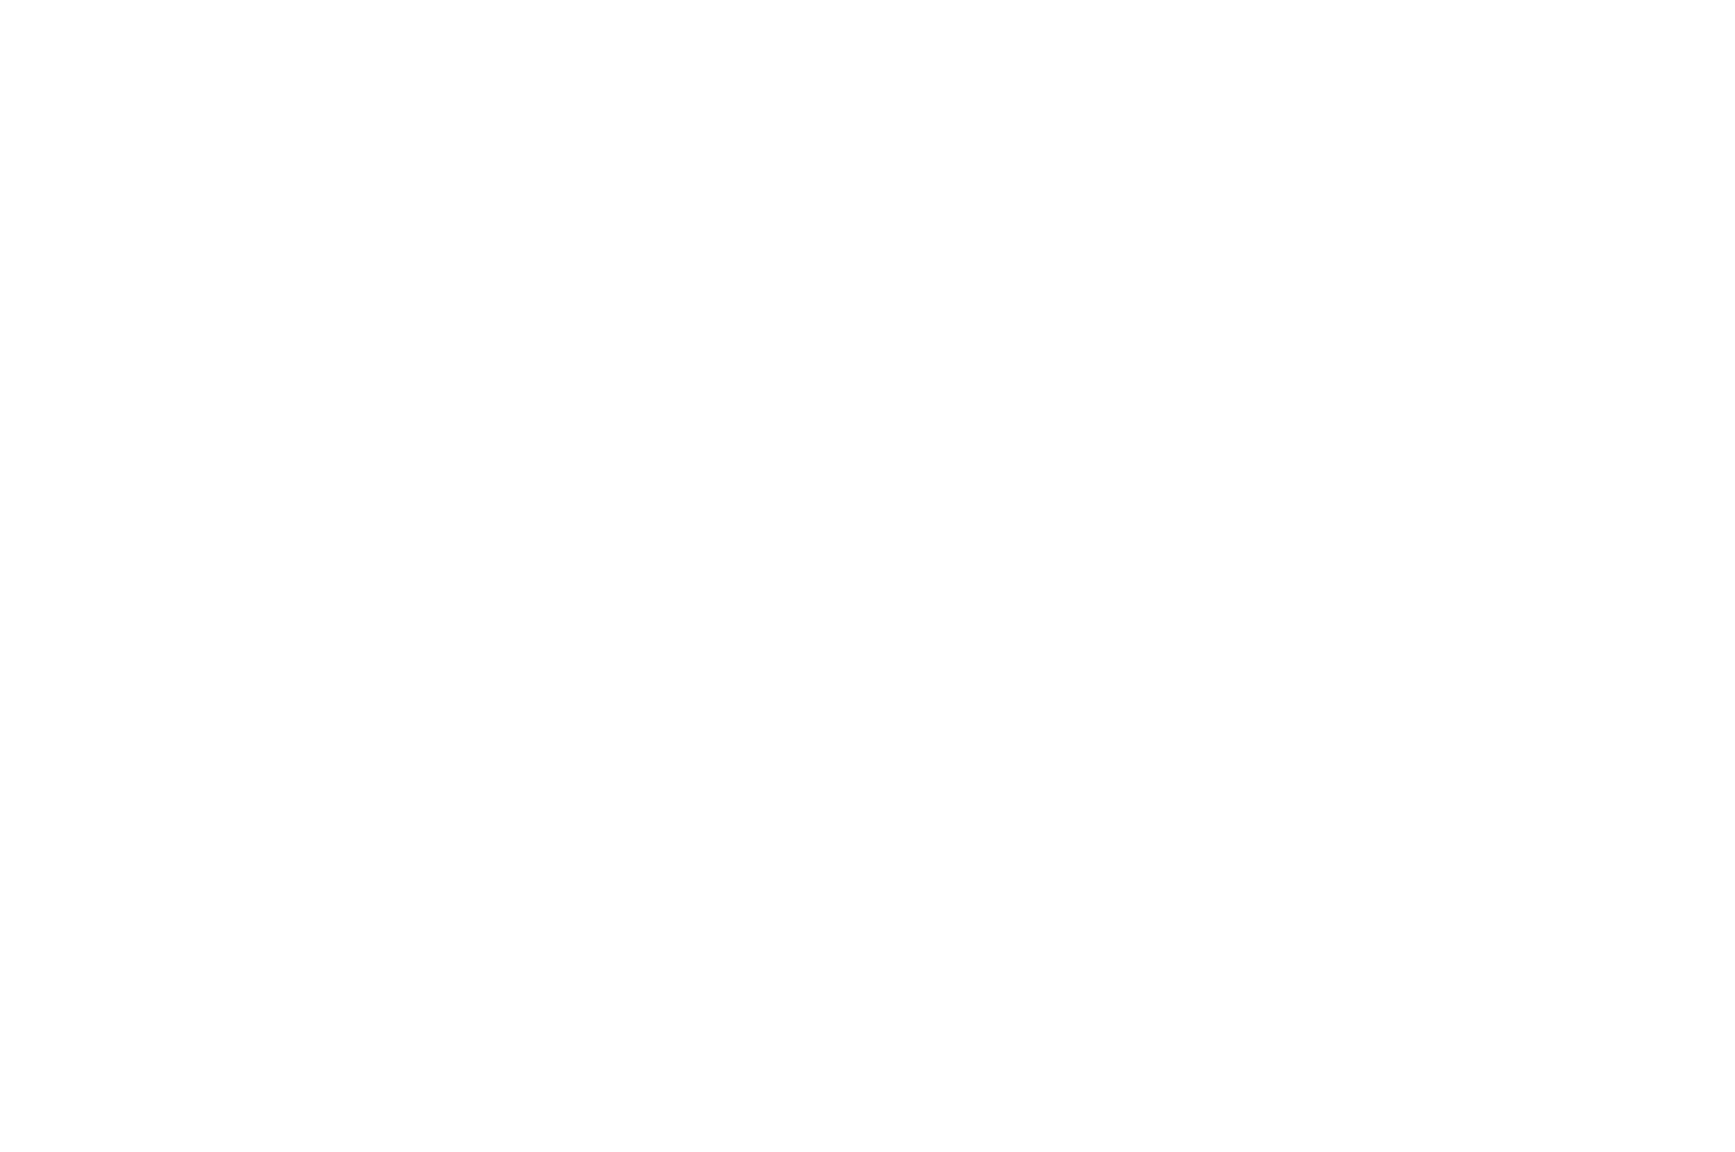 AWARD OF EXCELLENCE - BEST DIRECTOR  - HOLLYWOOD FILM COMPETITION 2016.png